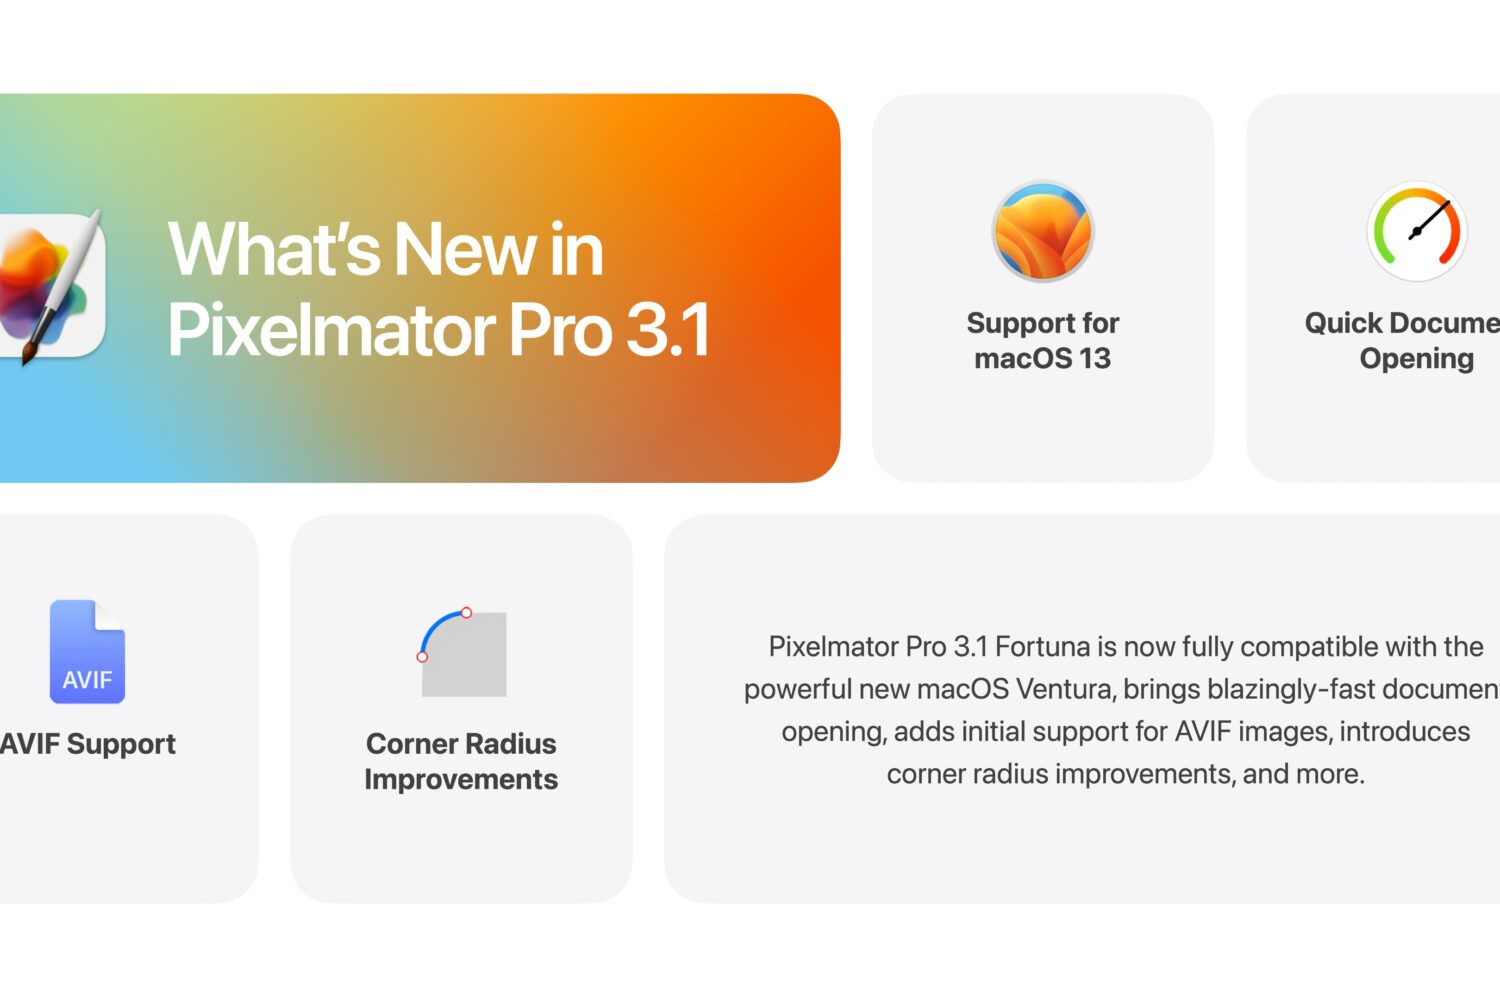 Infographic showcasing the key new features in Pixelmator Pro 3.1 for macOS